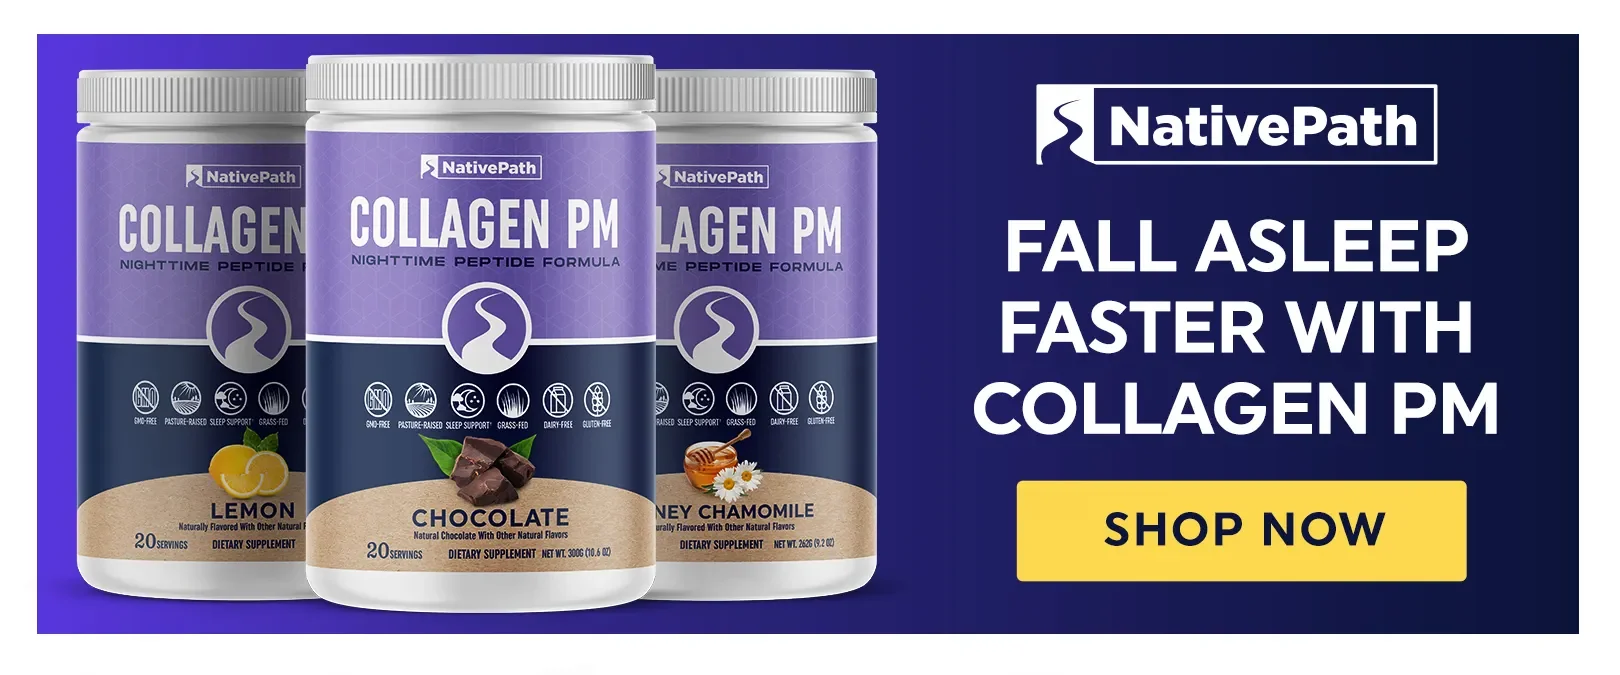 Fall Asleep Faster with NativePath Collagen PM